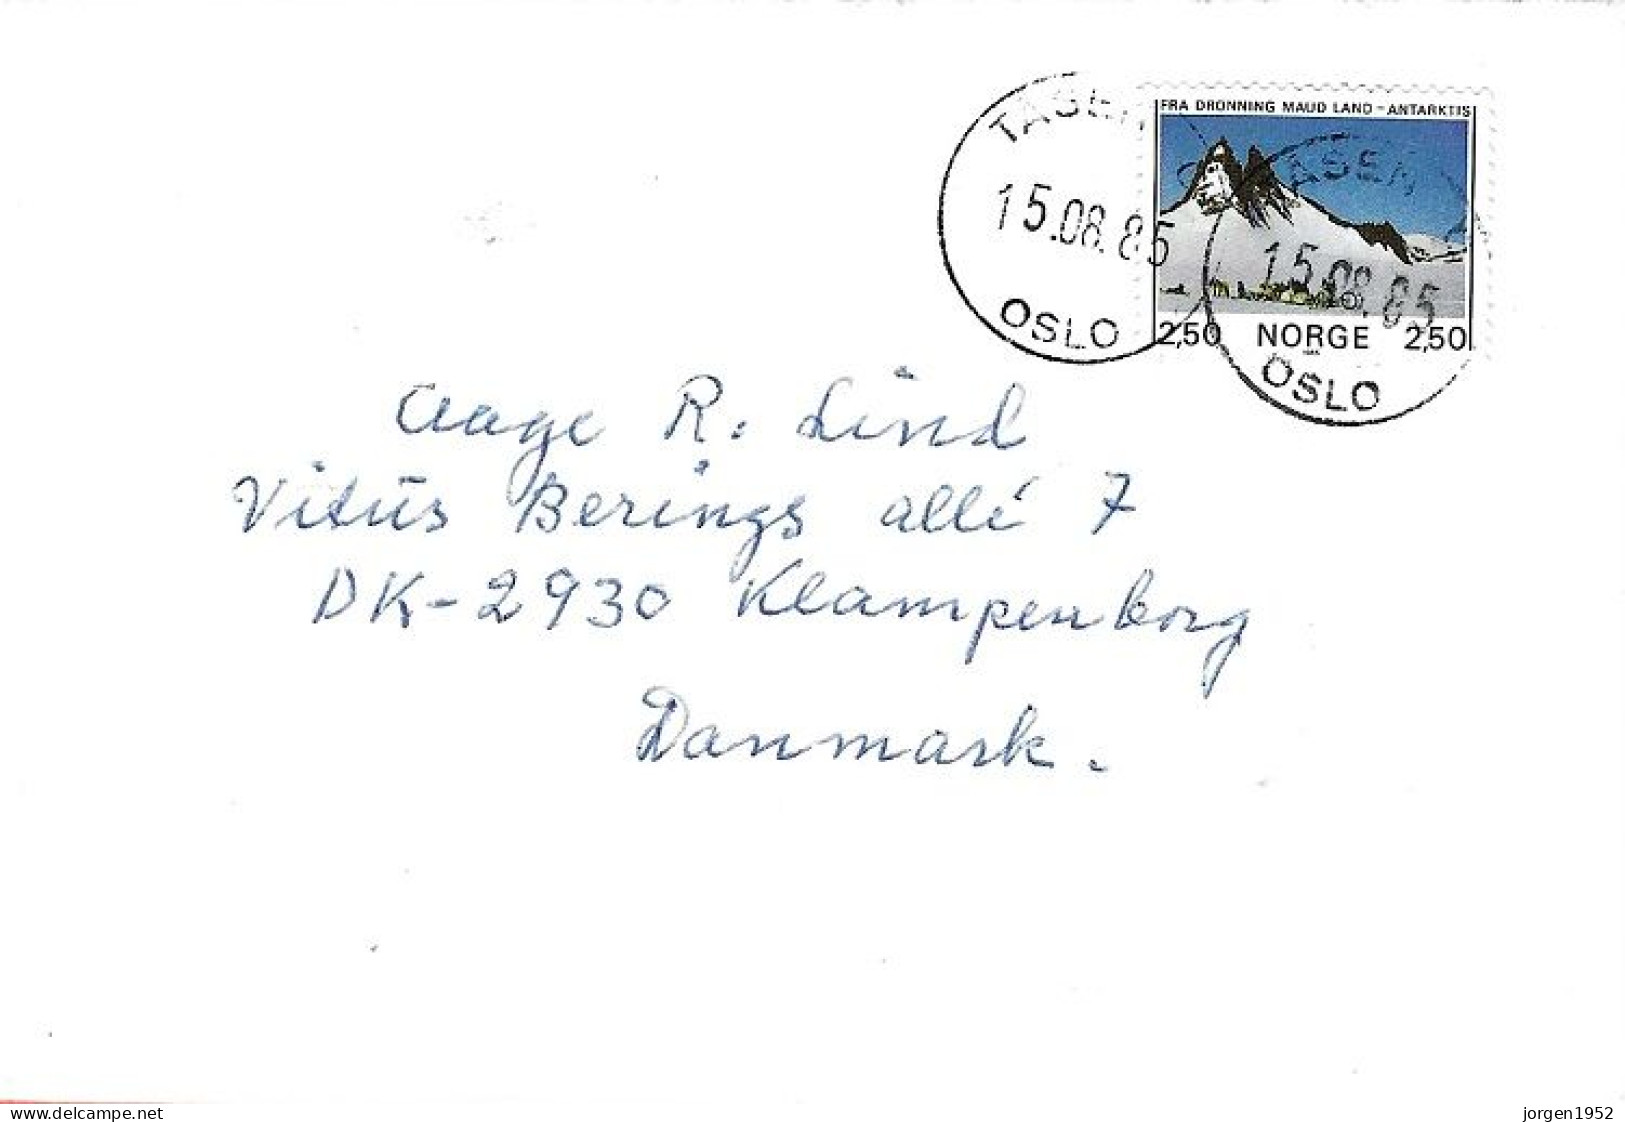 NORWAY # FROM 1985 - Postal Stationery